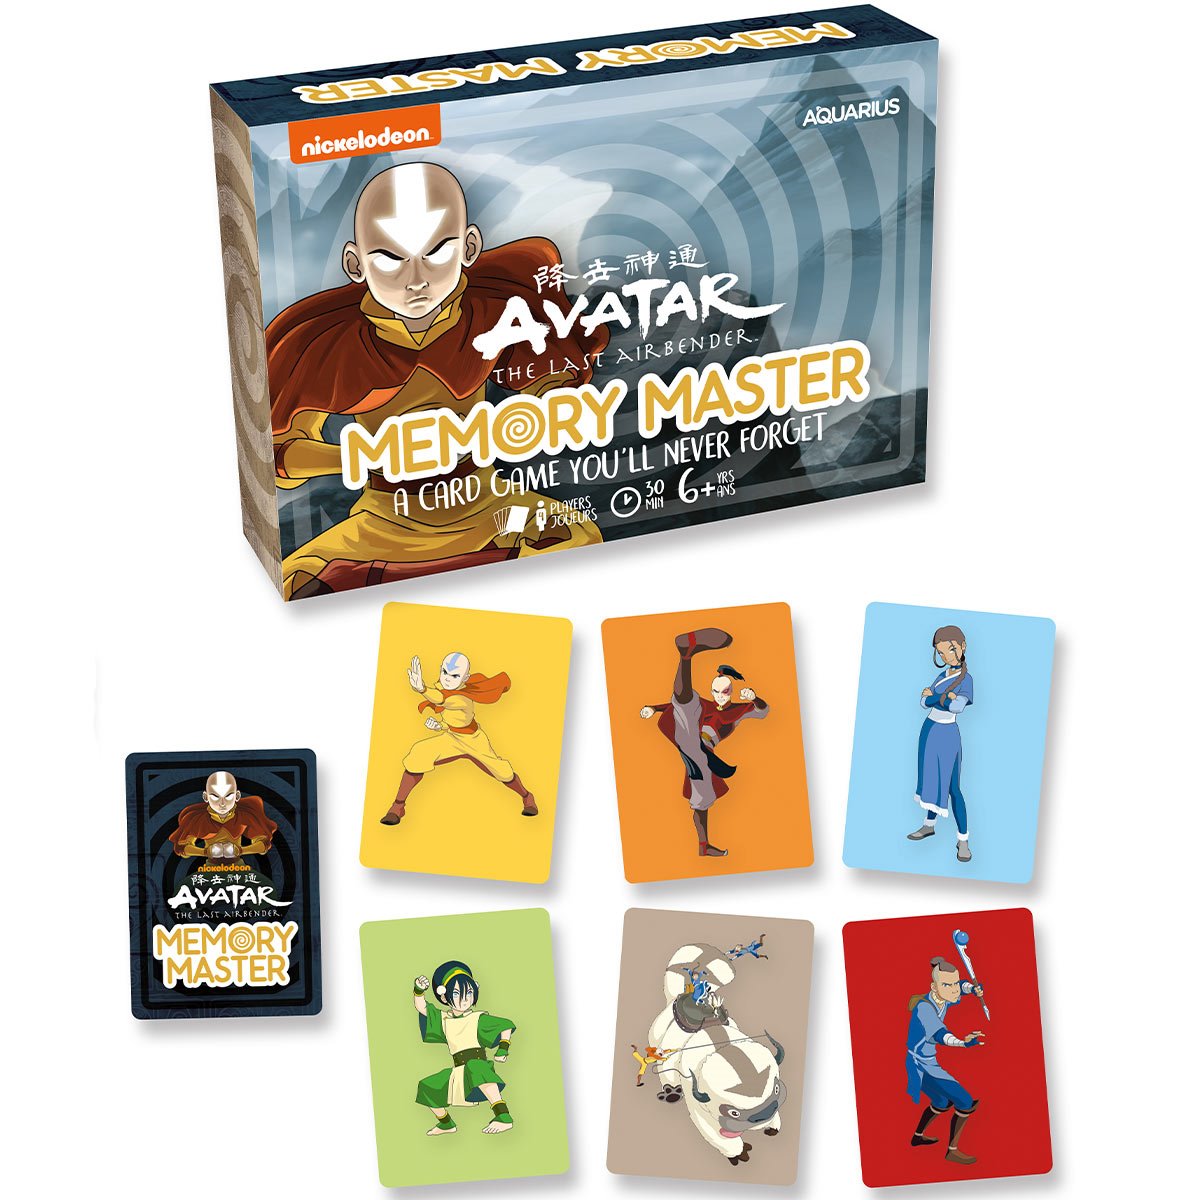 Avatar The Last Airbender  The Legend of Aang Video Game 2006  IMDb